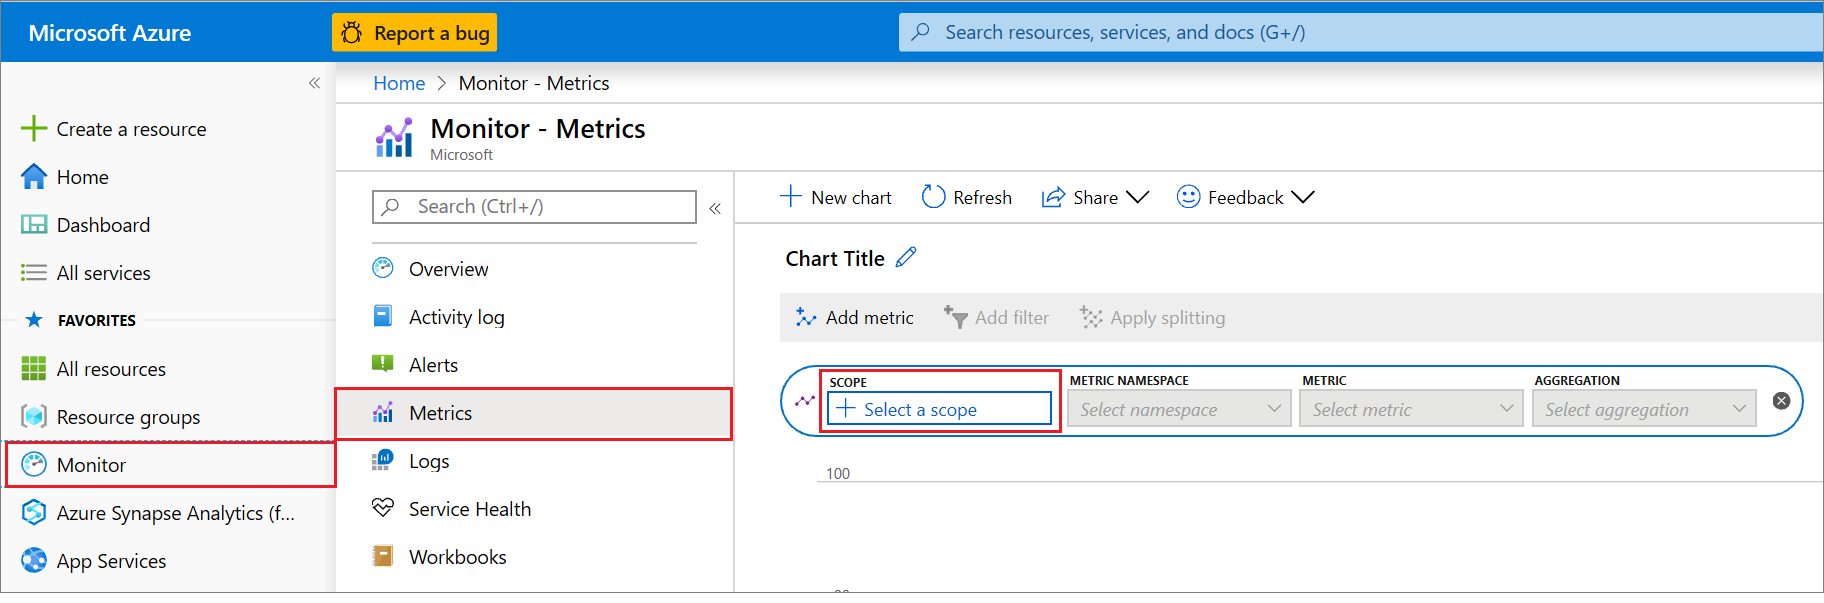 Screenshot shows Select a scope selected from Metrics in the Azure portal.